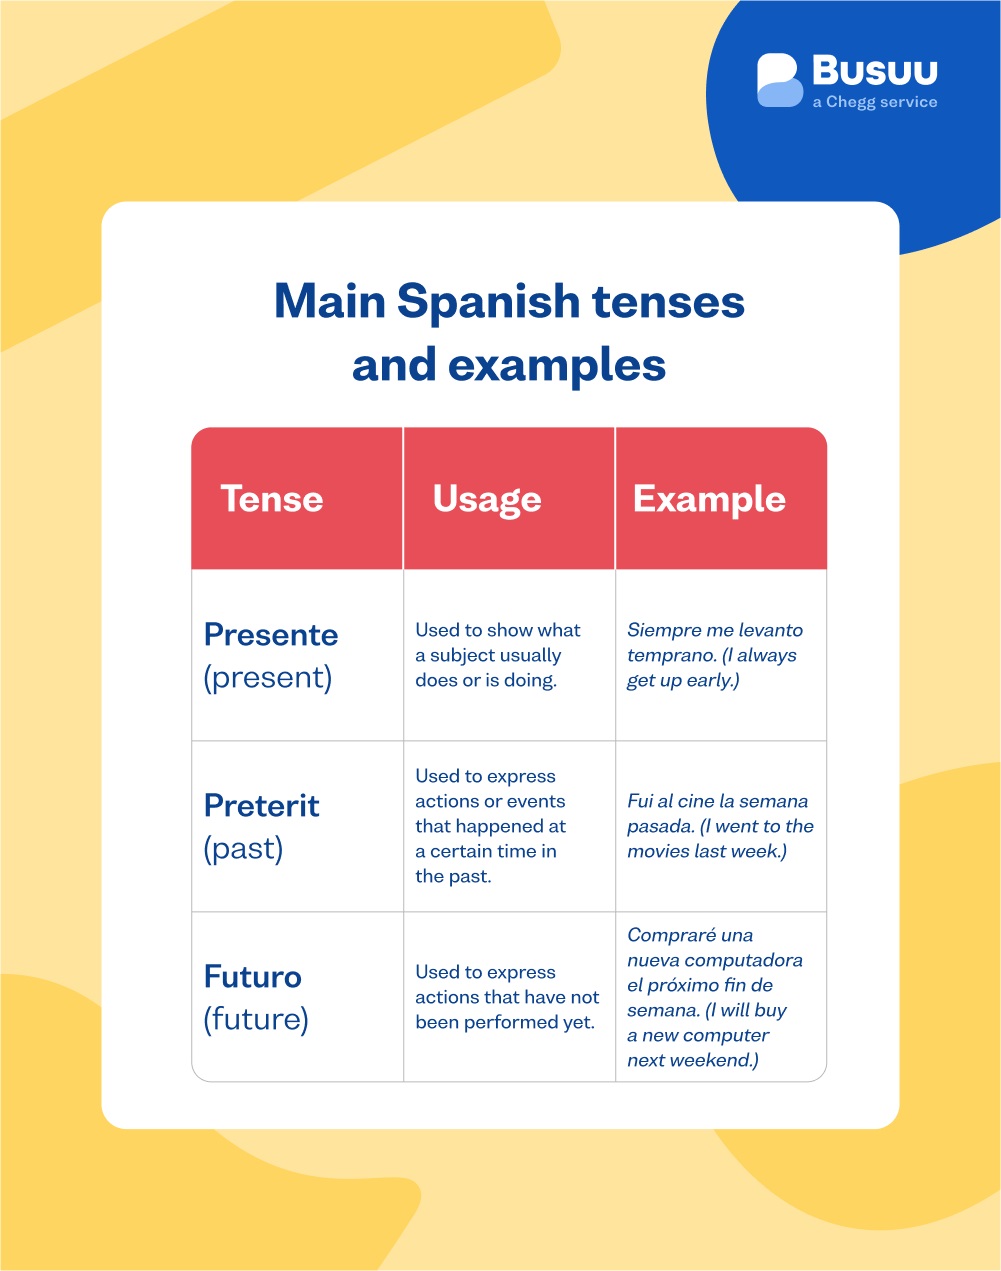 Spanish Tenses Explained: All you Need to Know - Busuu